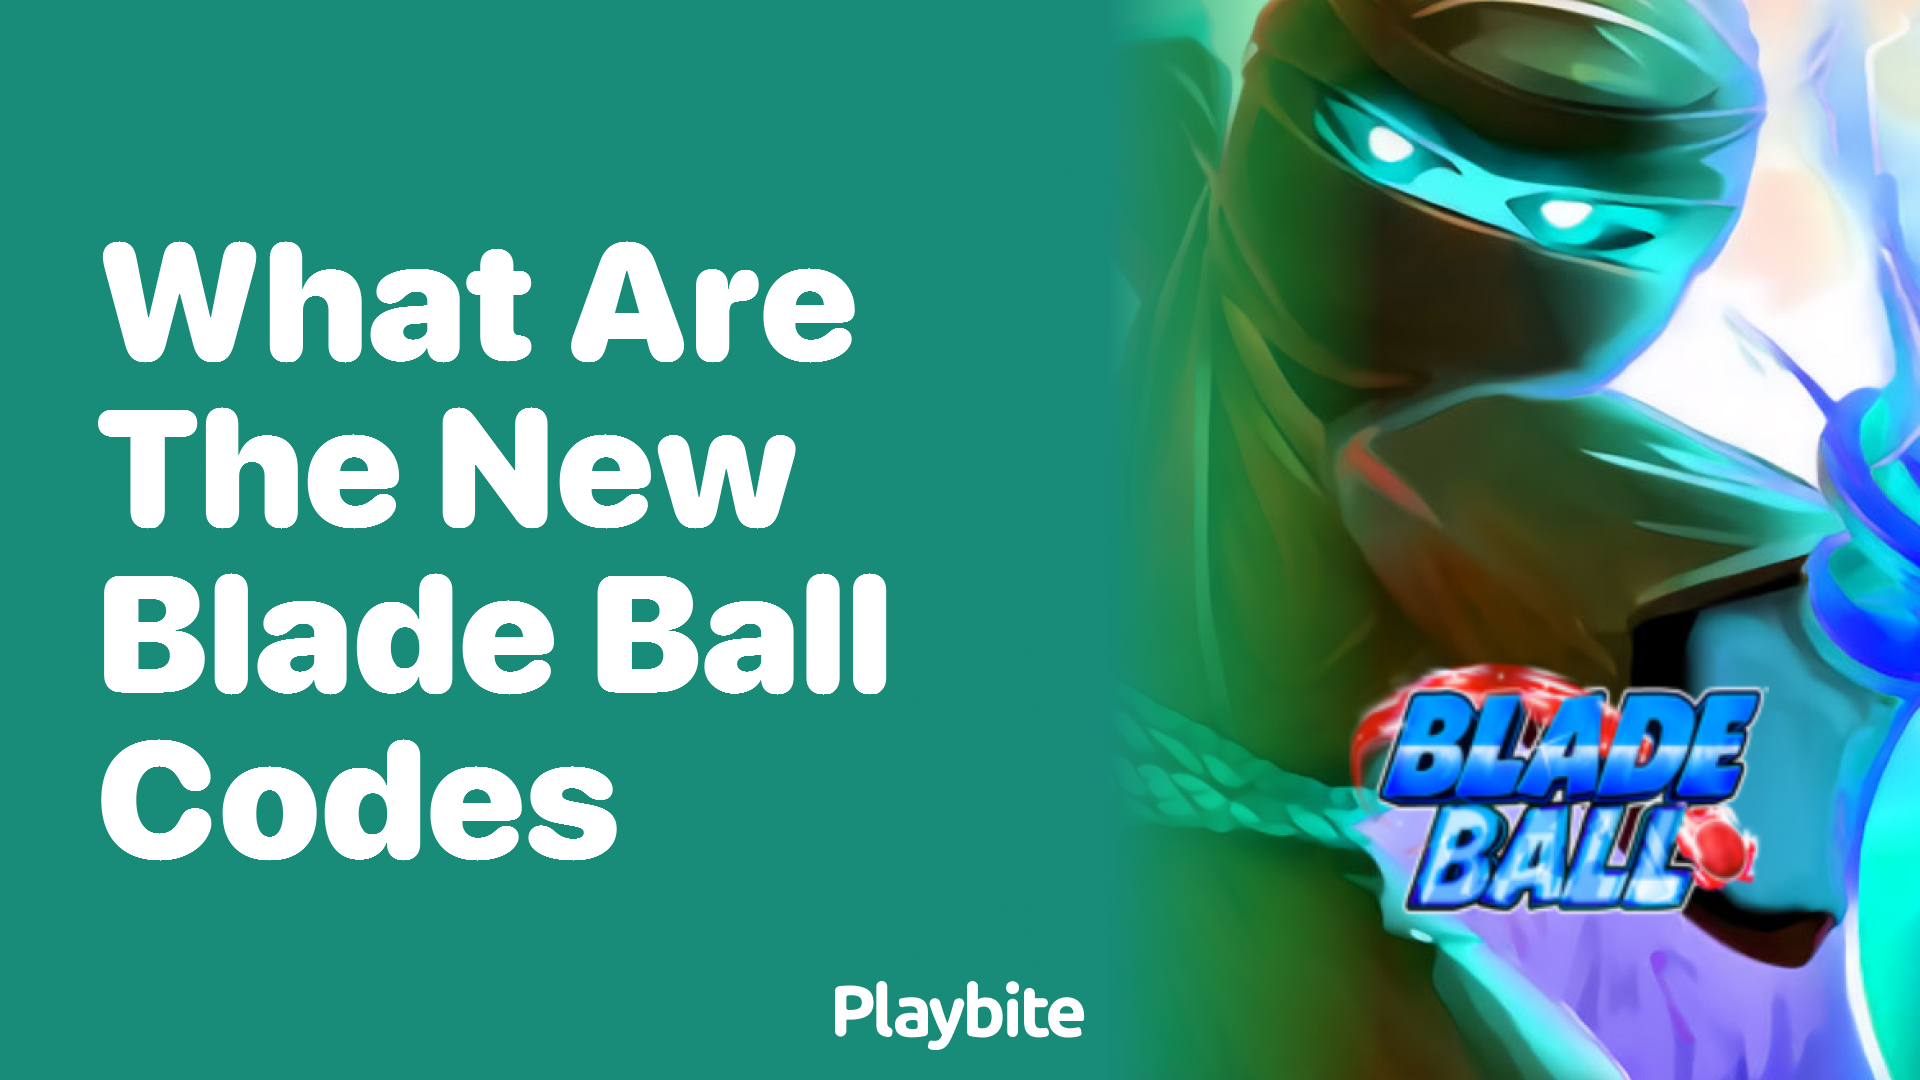 What Are the New Blade Ball Codes?